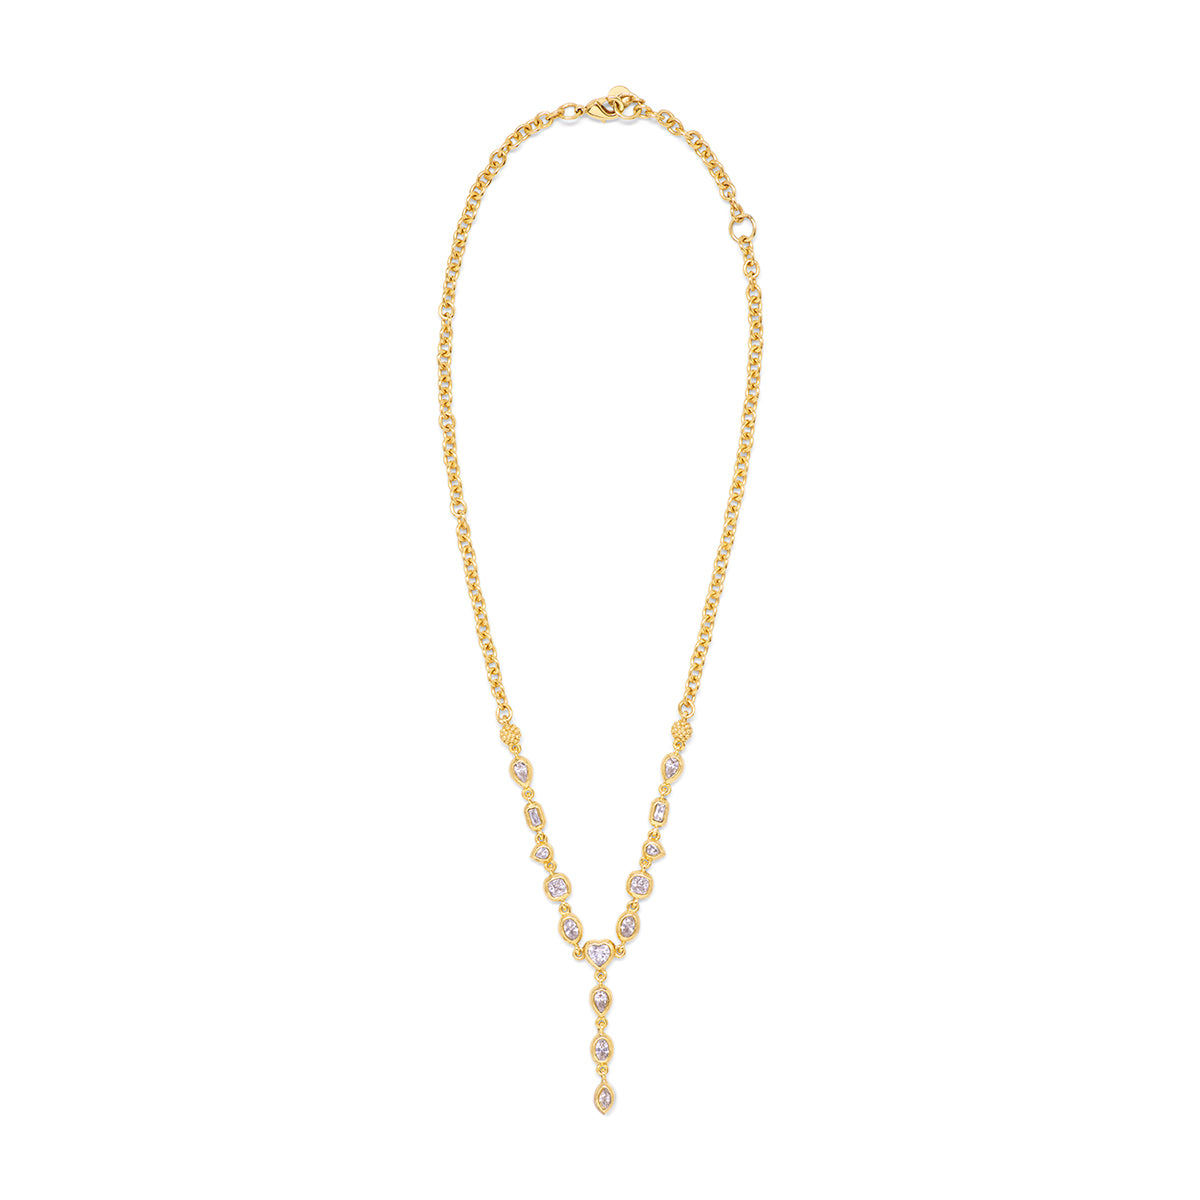 Joie Petite Lariat Necklace with Clear Cubic Zirconia